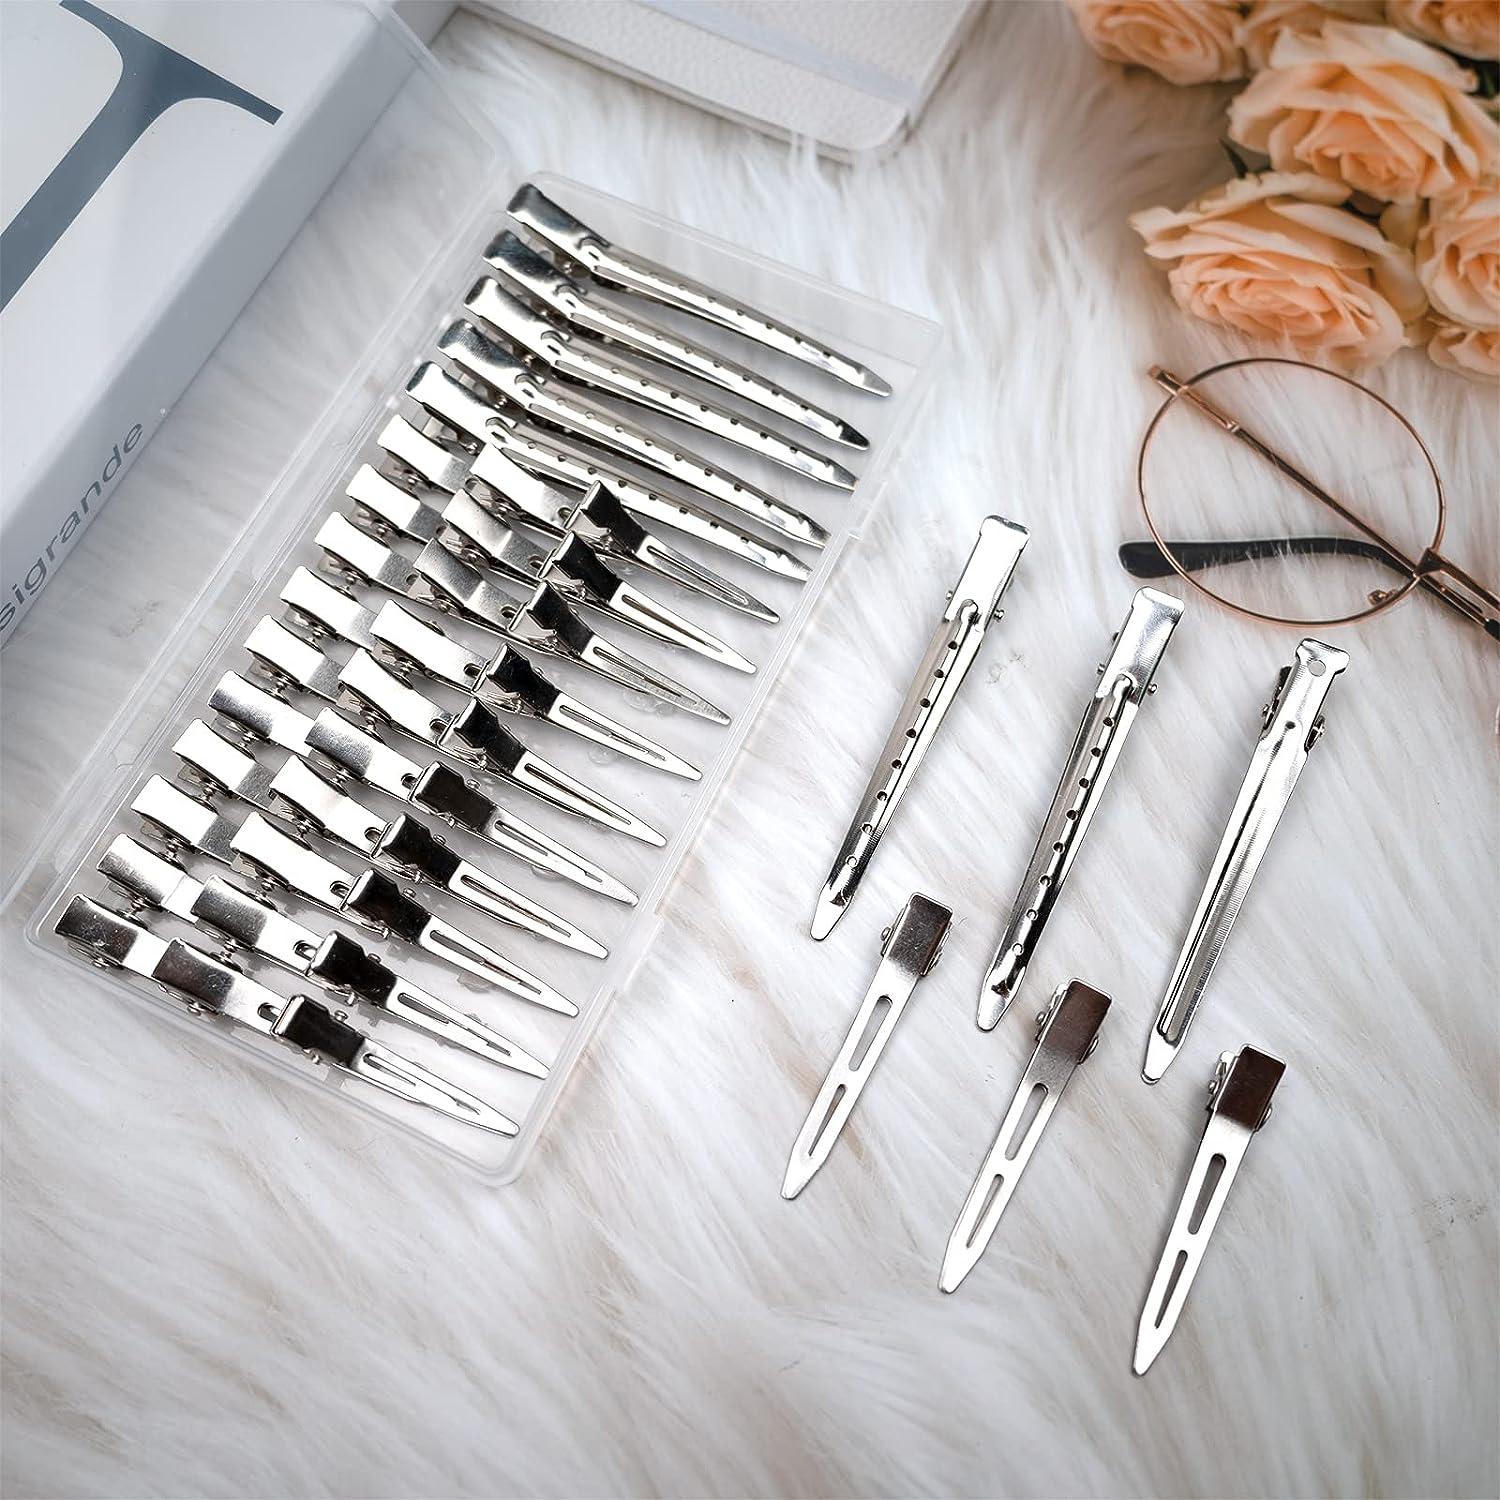 60 Pcs Metal Duck Billed Hair Clips for Women Styling Sectioning, Gingbiss 1.77 inch Silver Hairdressing Single Prong Curl Clips with Storge Box